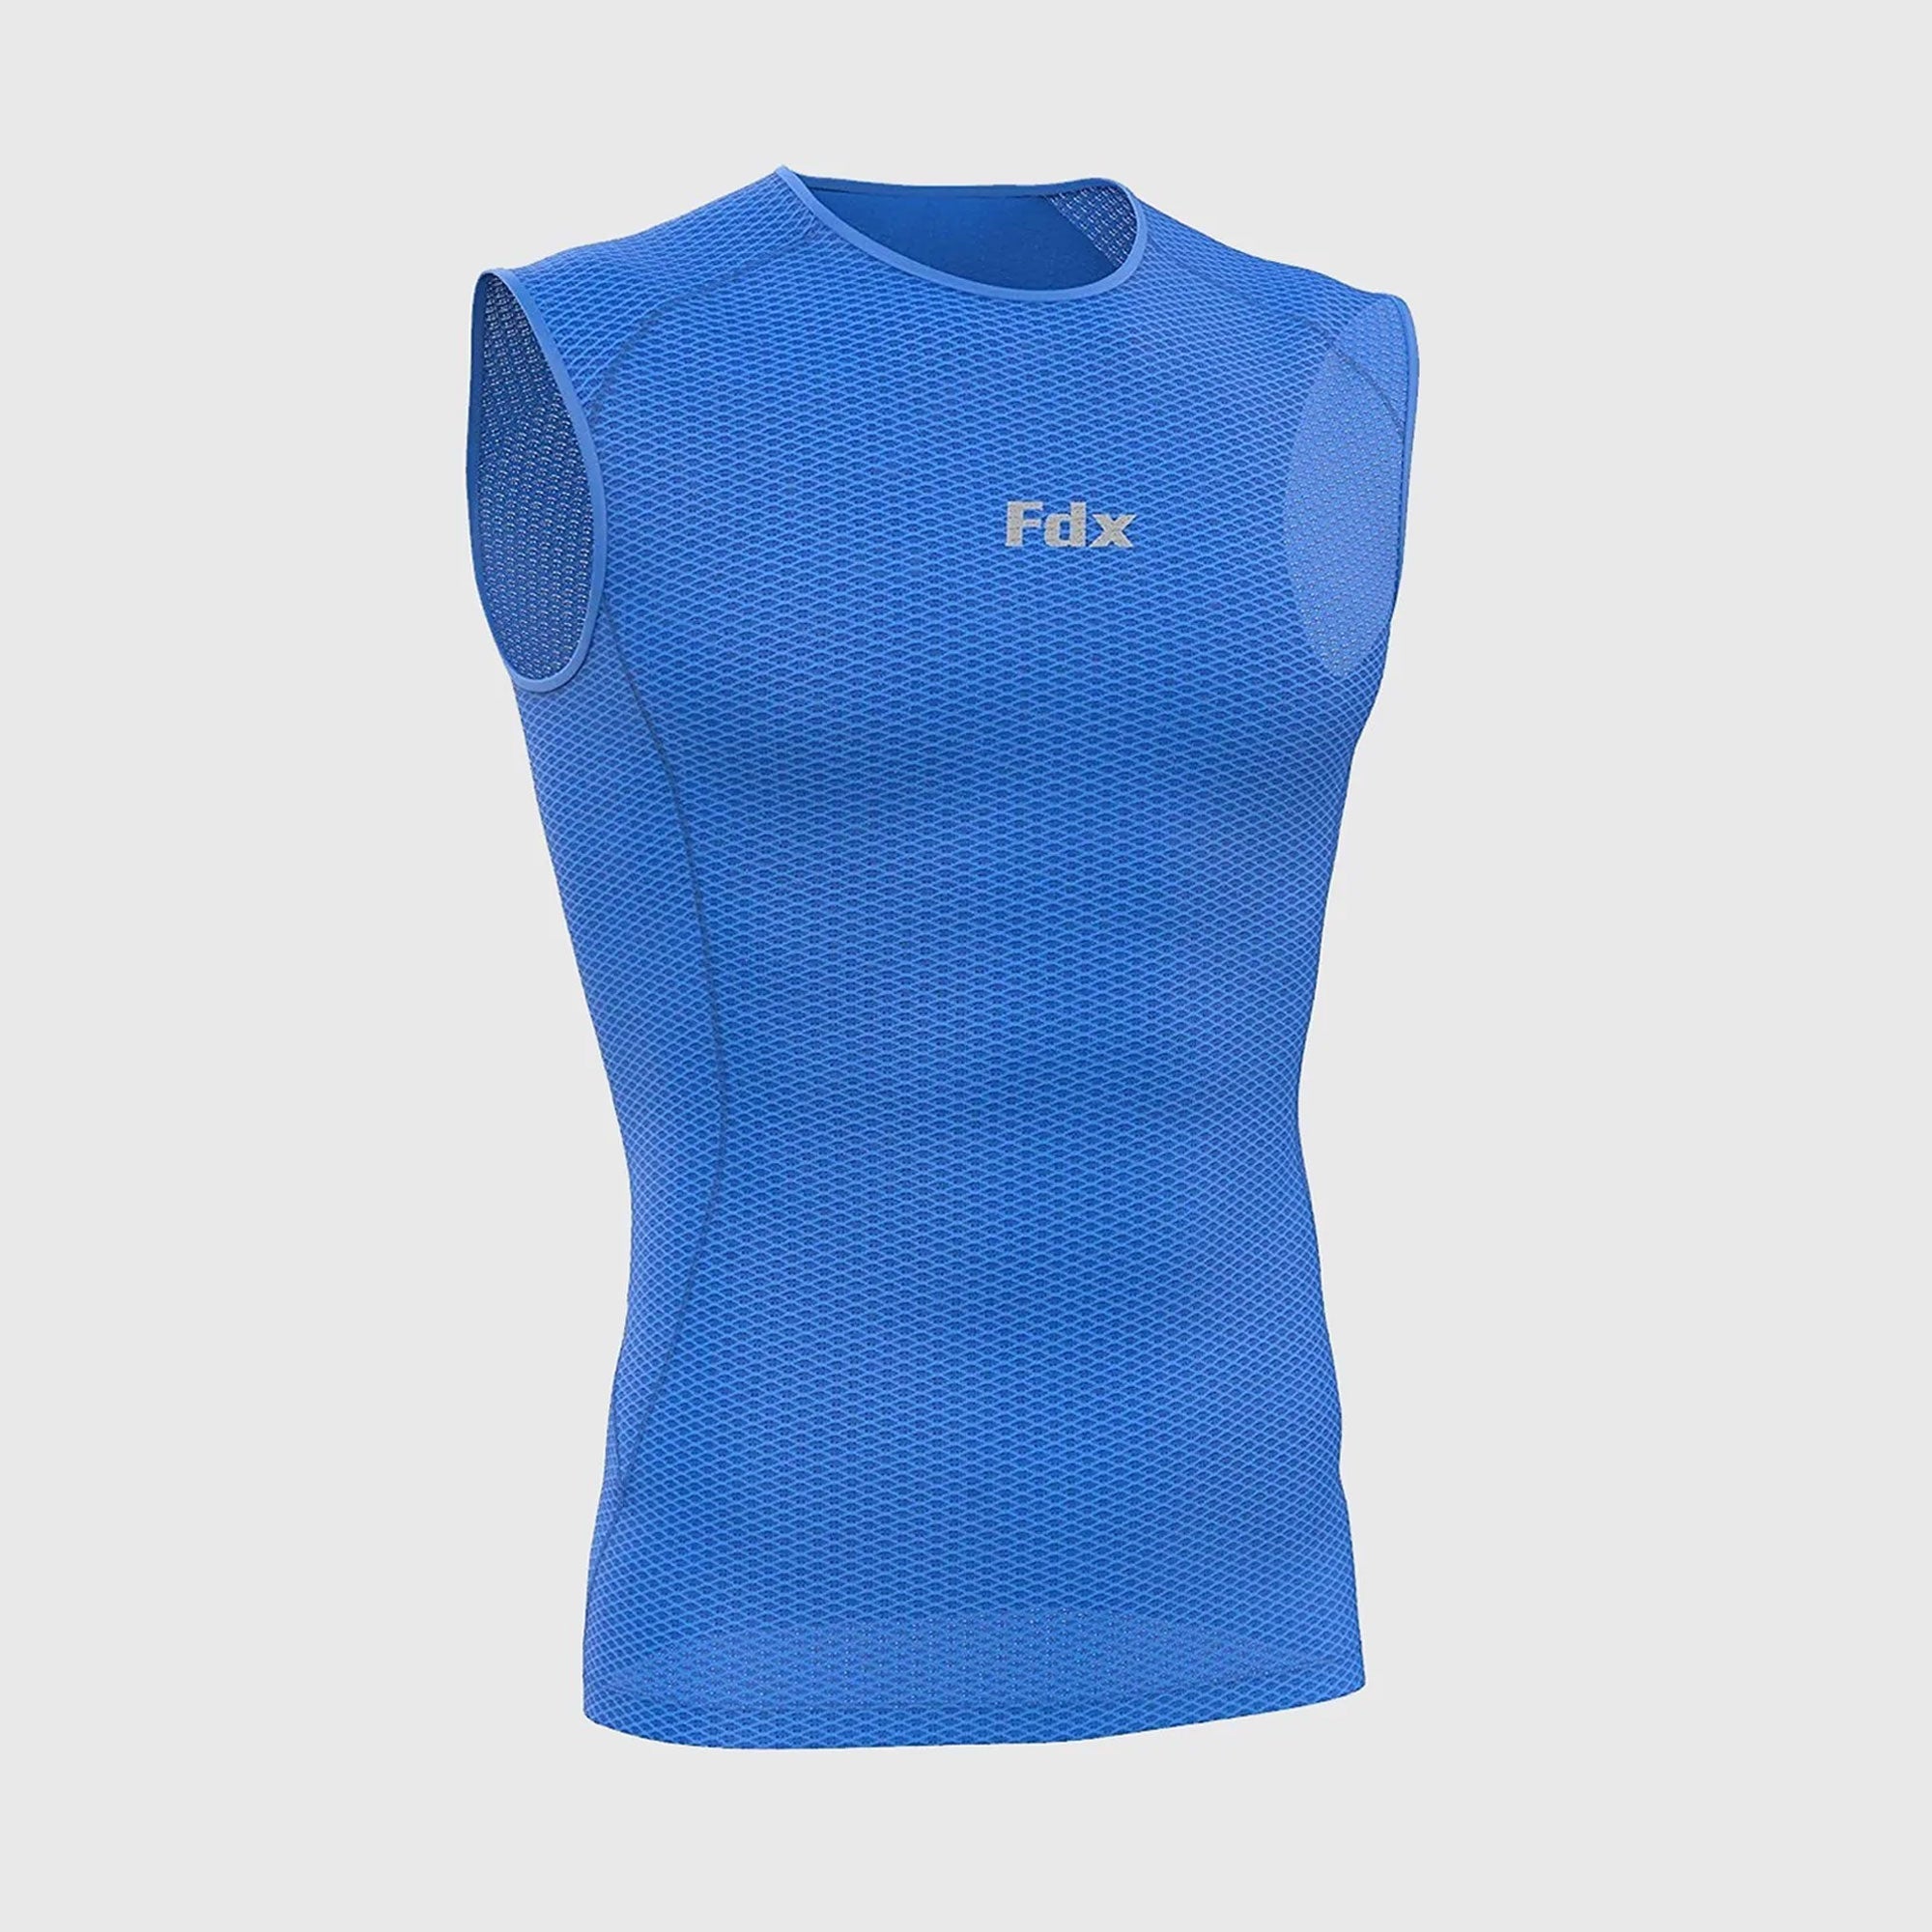 Fdx Mens Blue Sleeveless Mesh Compression Top Running Gym Workout Wear Rash Guard Stretchable Breathable - Aeroform